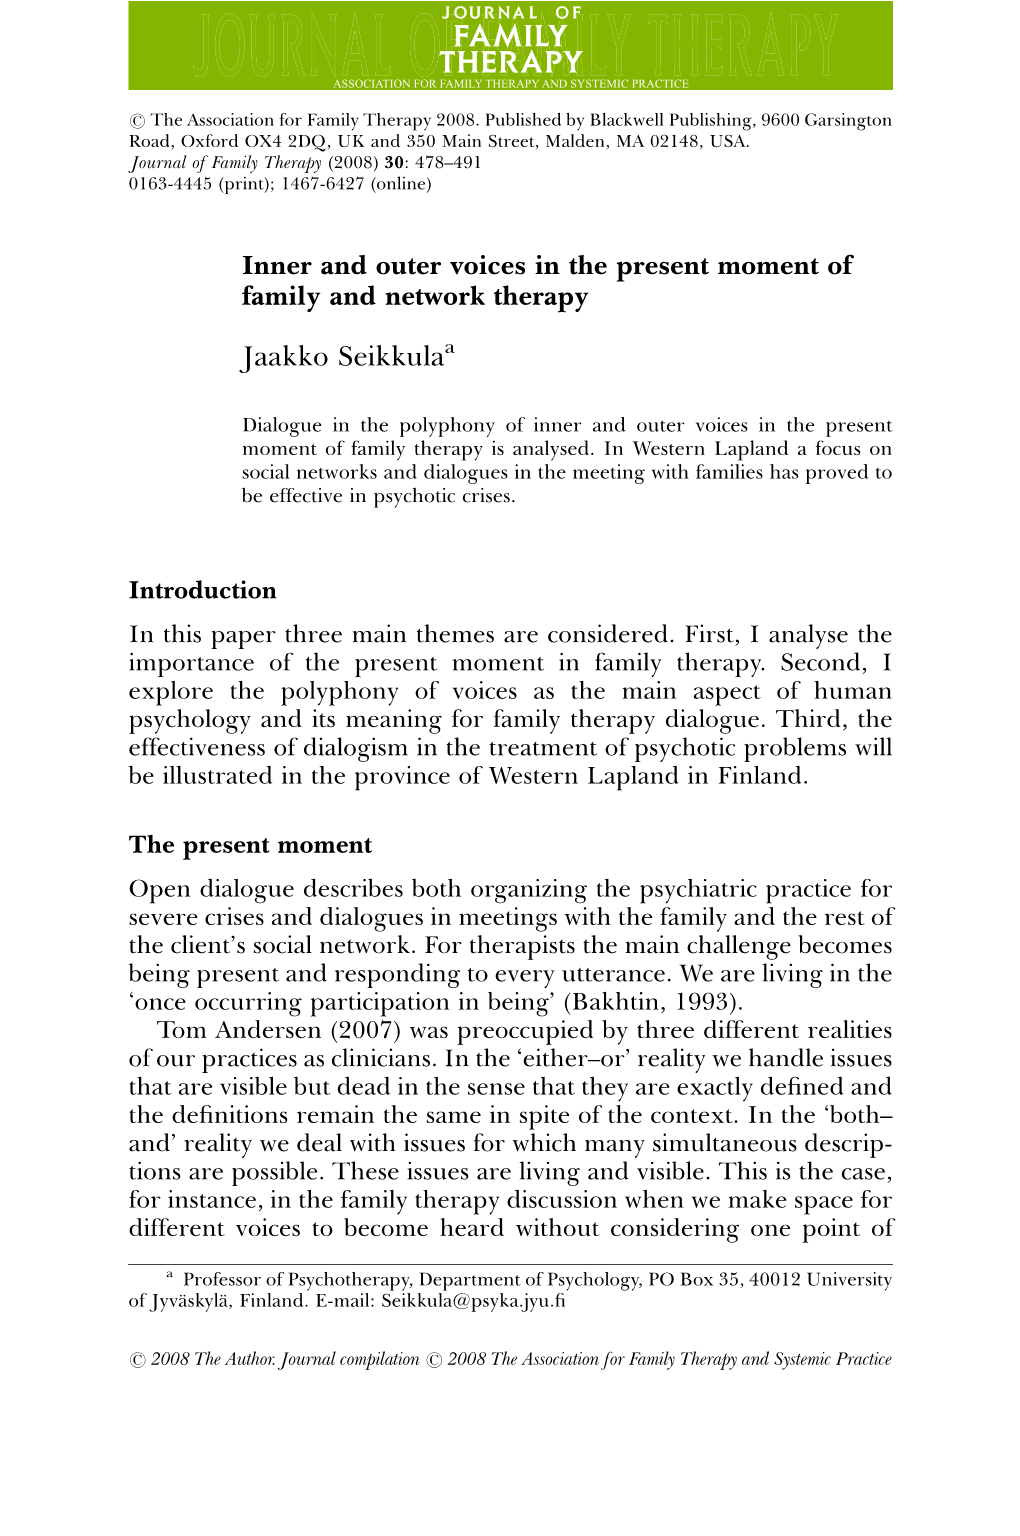 Inner and Outer Voices in the Present Moment of Family and Network Therapy Jaakko Seikkulaa